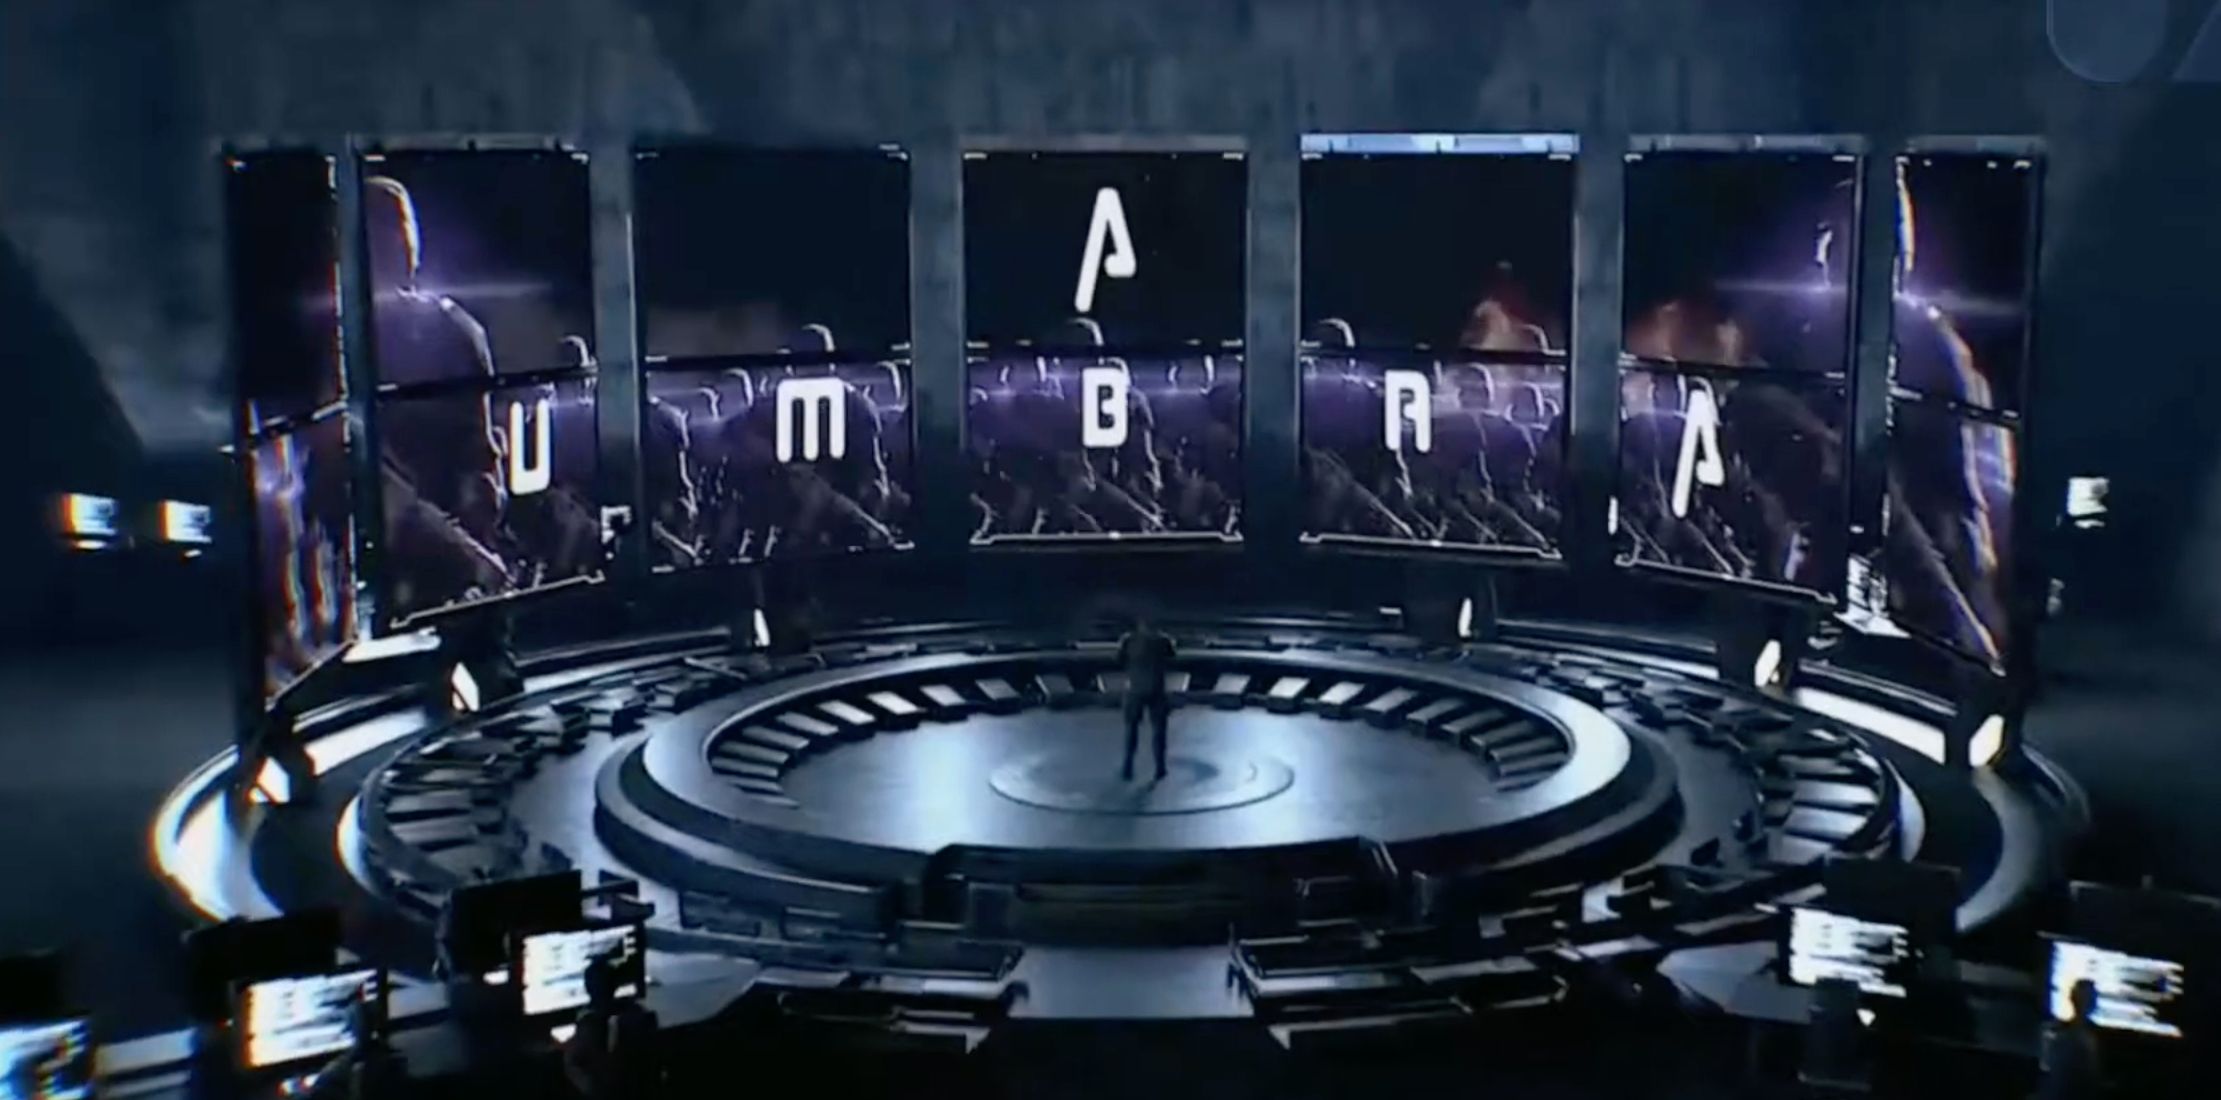 A series of screens, each displaying one letter to form the word UMBRA